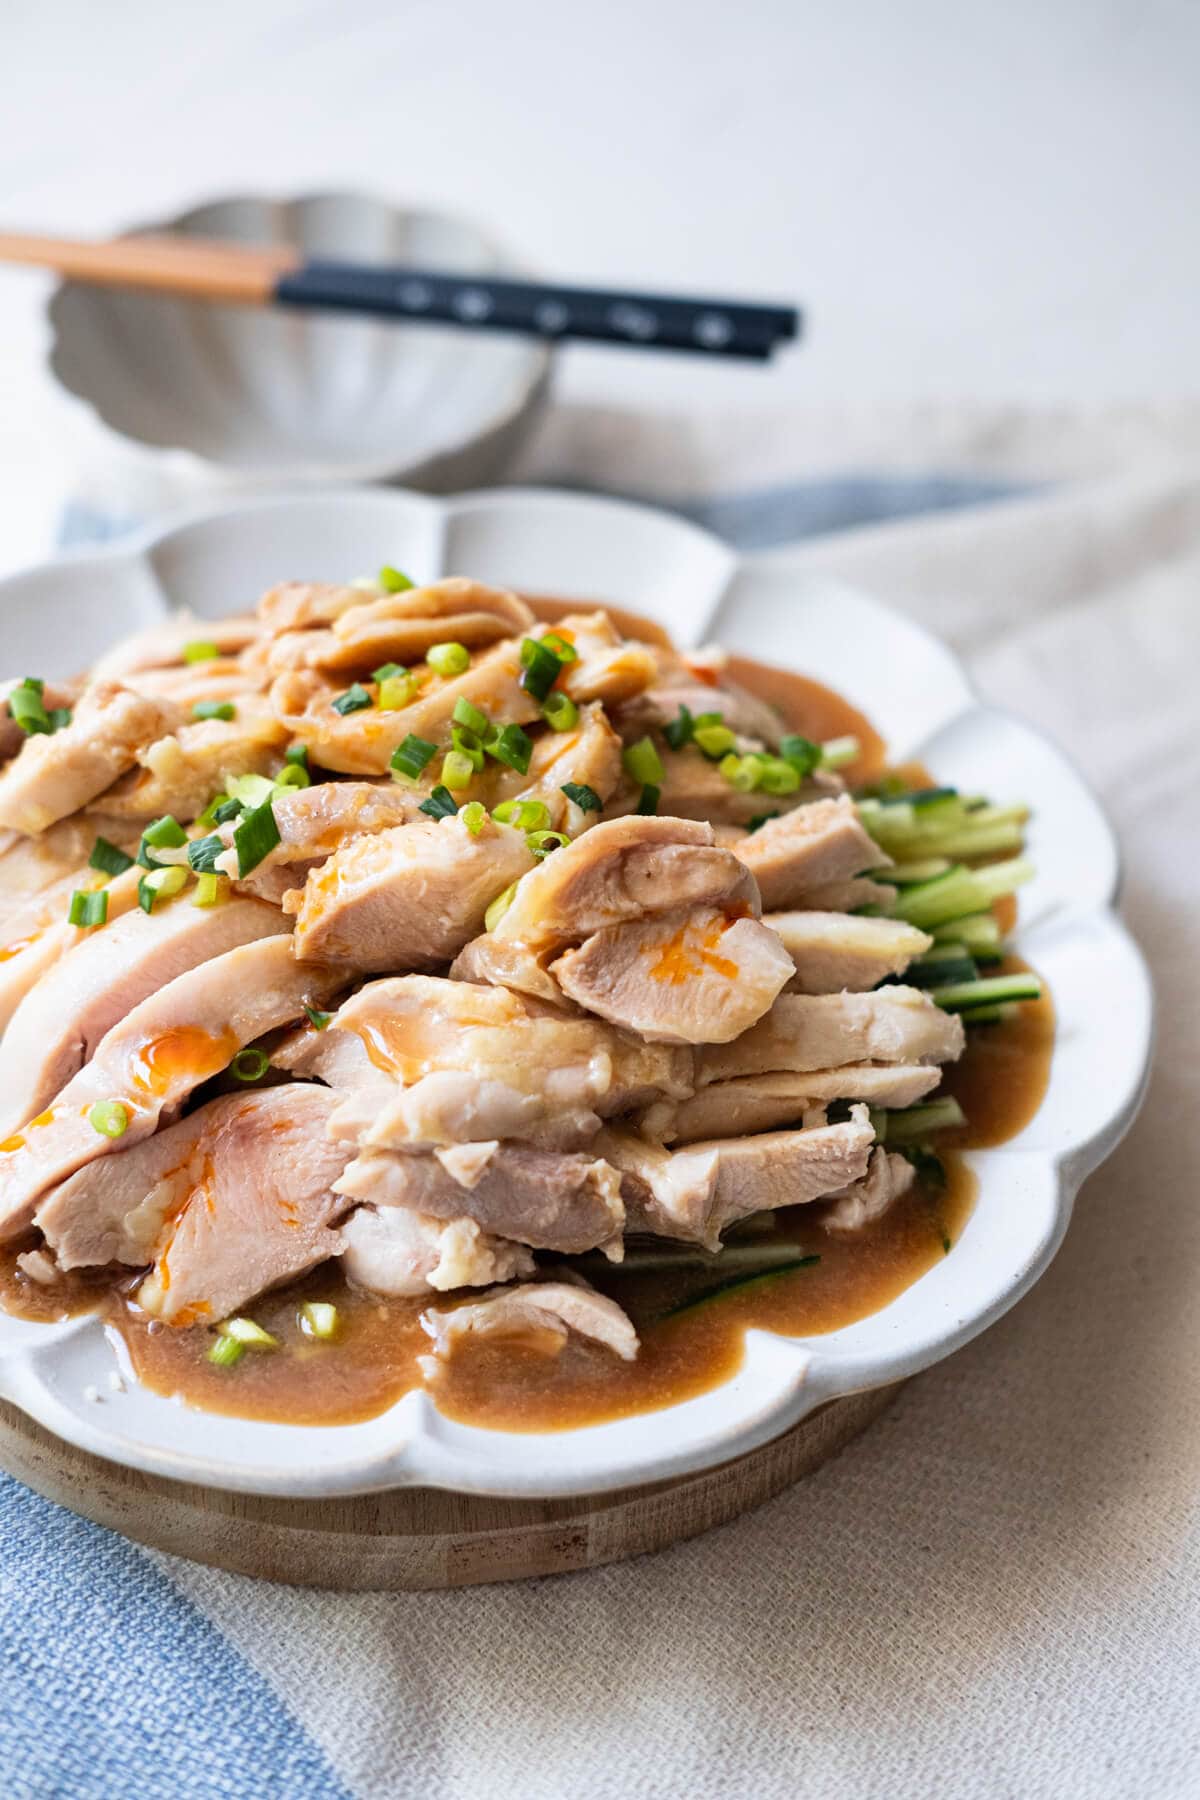 Tender chicken with sesame sauce drizzle on top, shredded Japanese cucumber underneath, and chopped green onions sprinkled on top served in a white plate. 